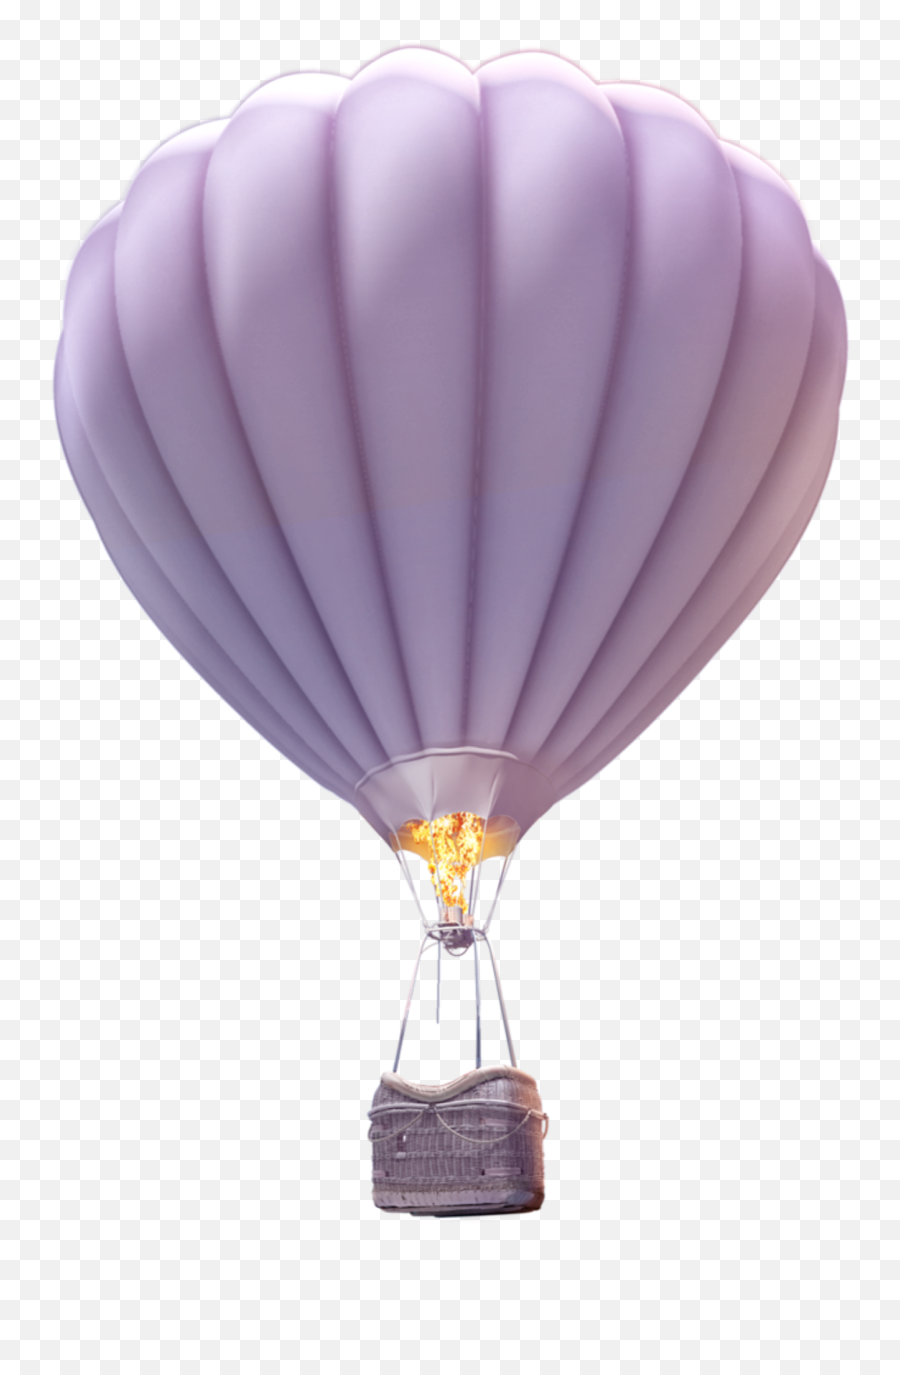 Largest Collection Of Free - Toedit Baloon Stickers On Picsart Air Balloon With Fire Png Emoji,Baloon Emoji